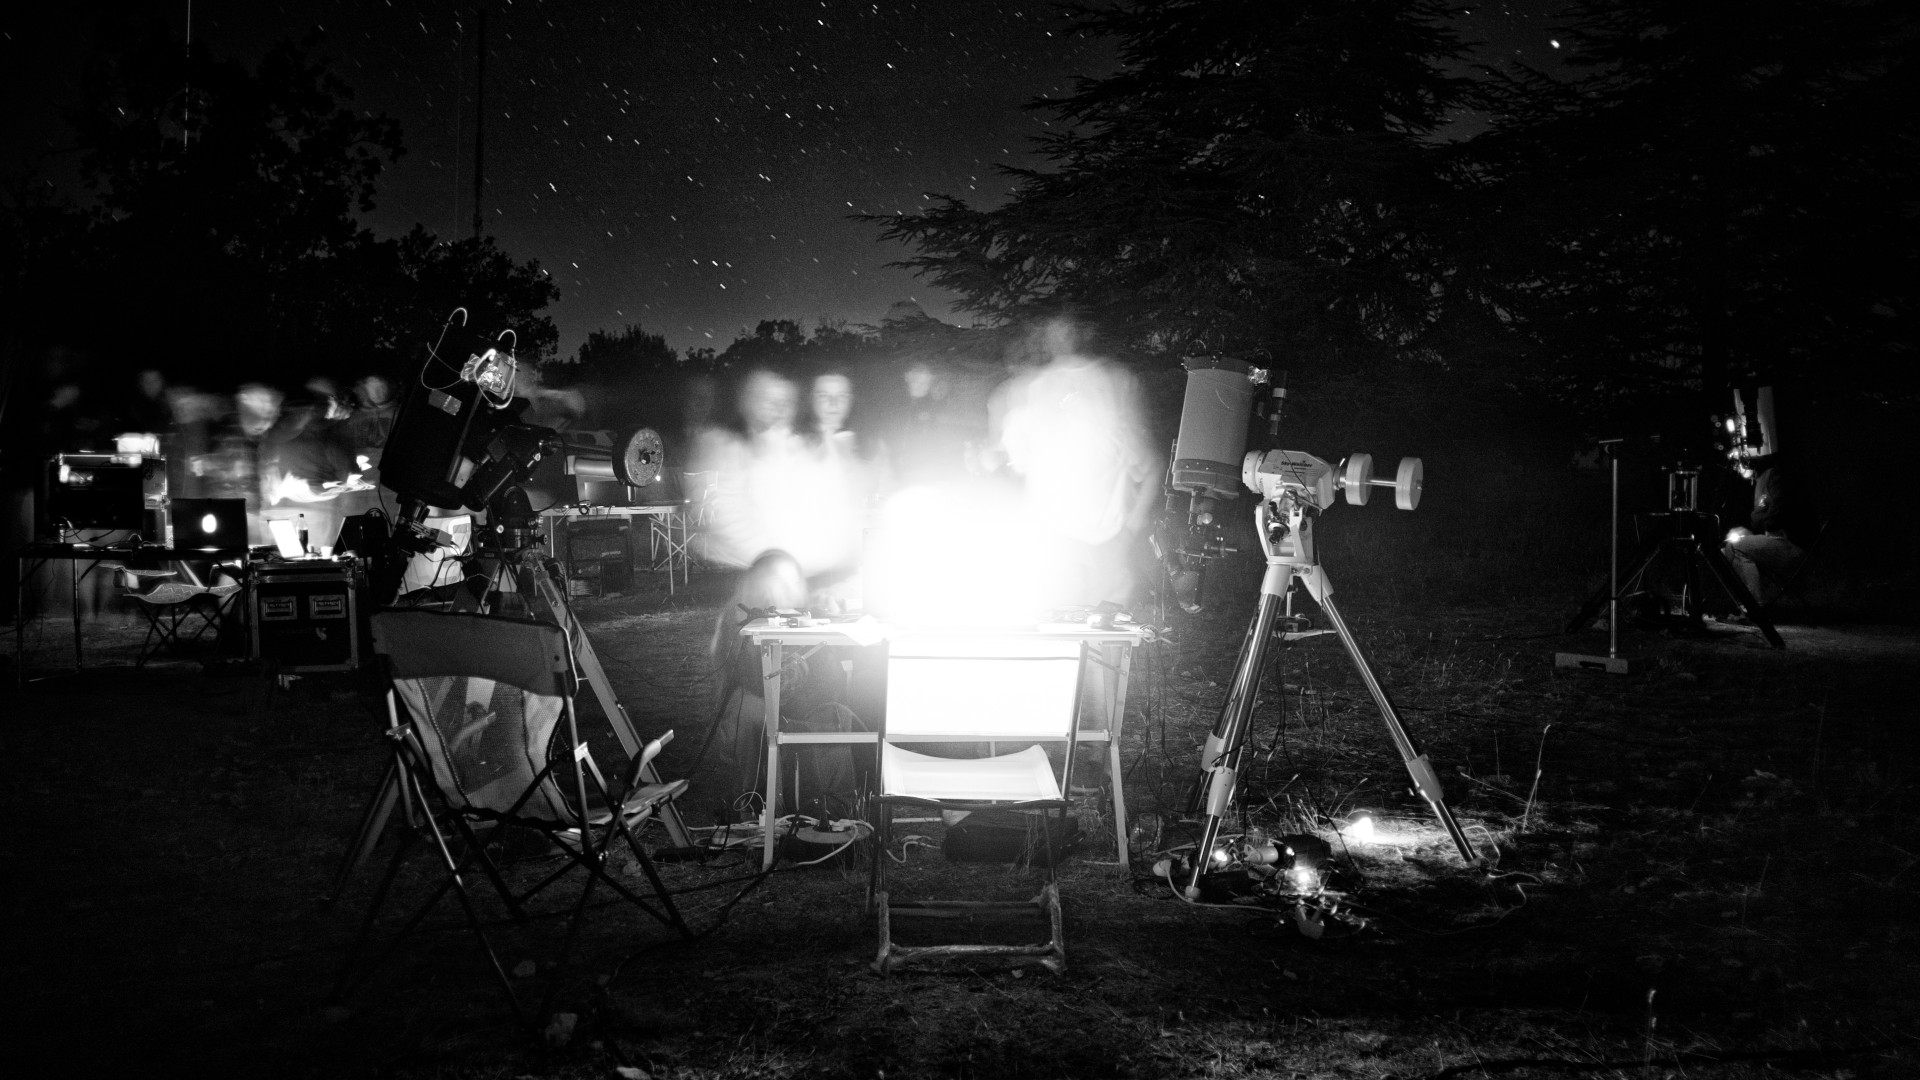 Amateur astronomers can make breathtaking discoveries. This new photobook on Kickstarter shows how Space